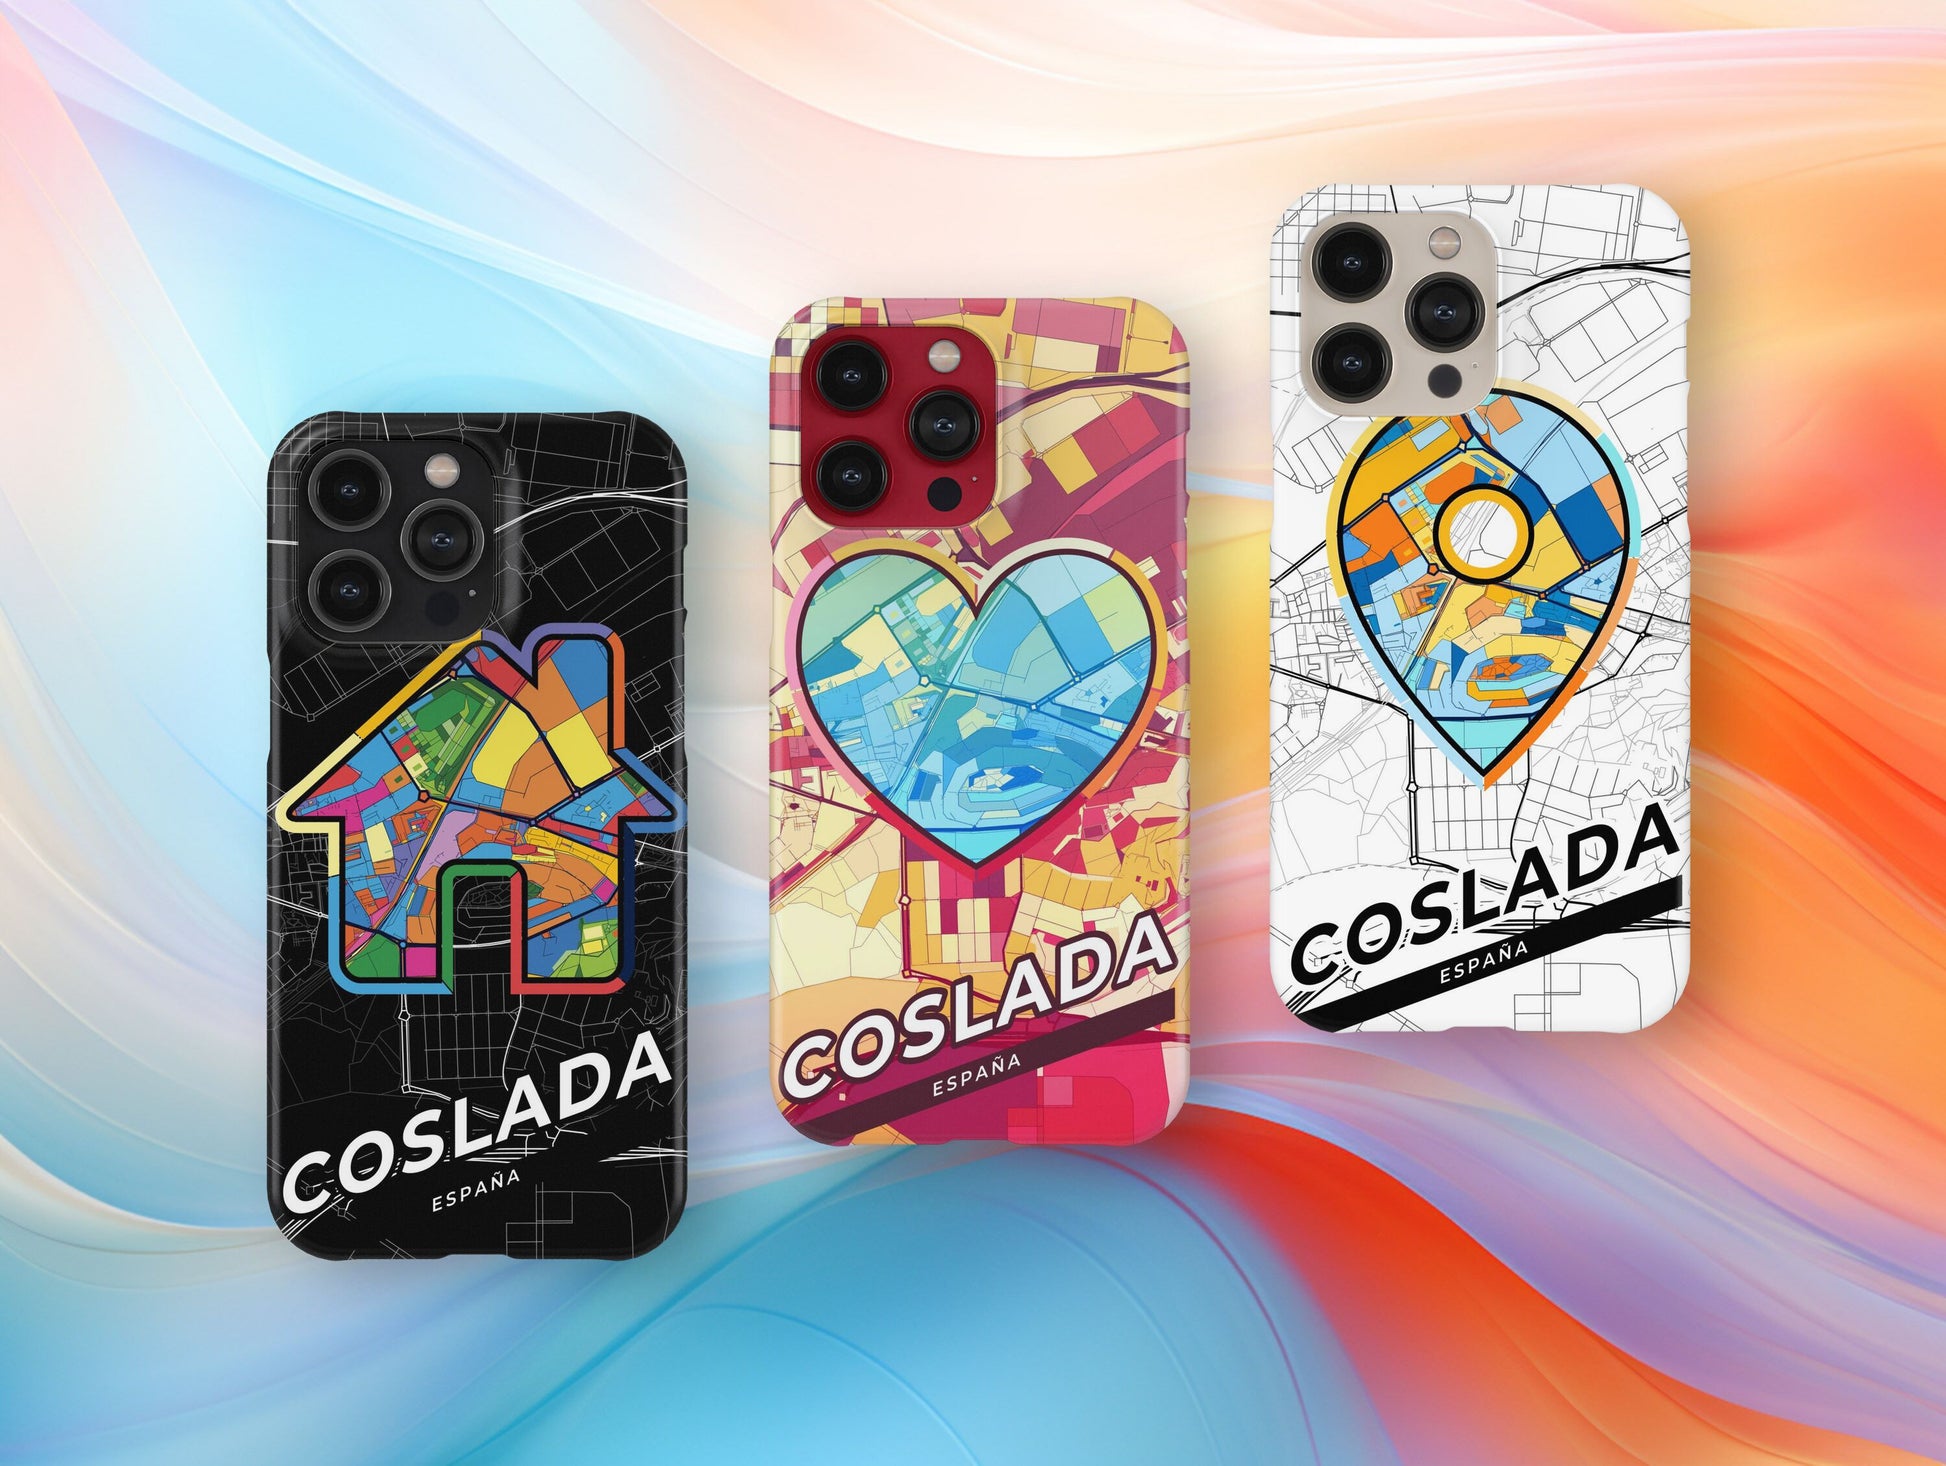 Coslada Spain slim phone case with colorful icon. Birthday, wedding or housewarming gift. Couple match cases.